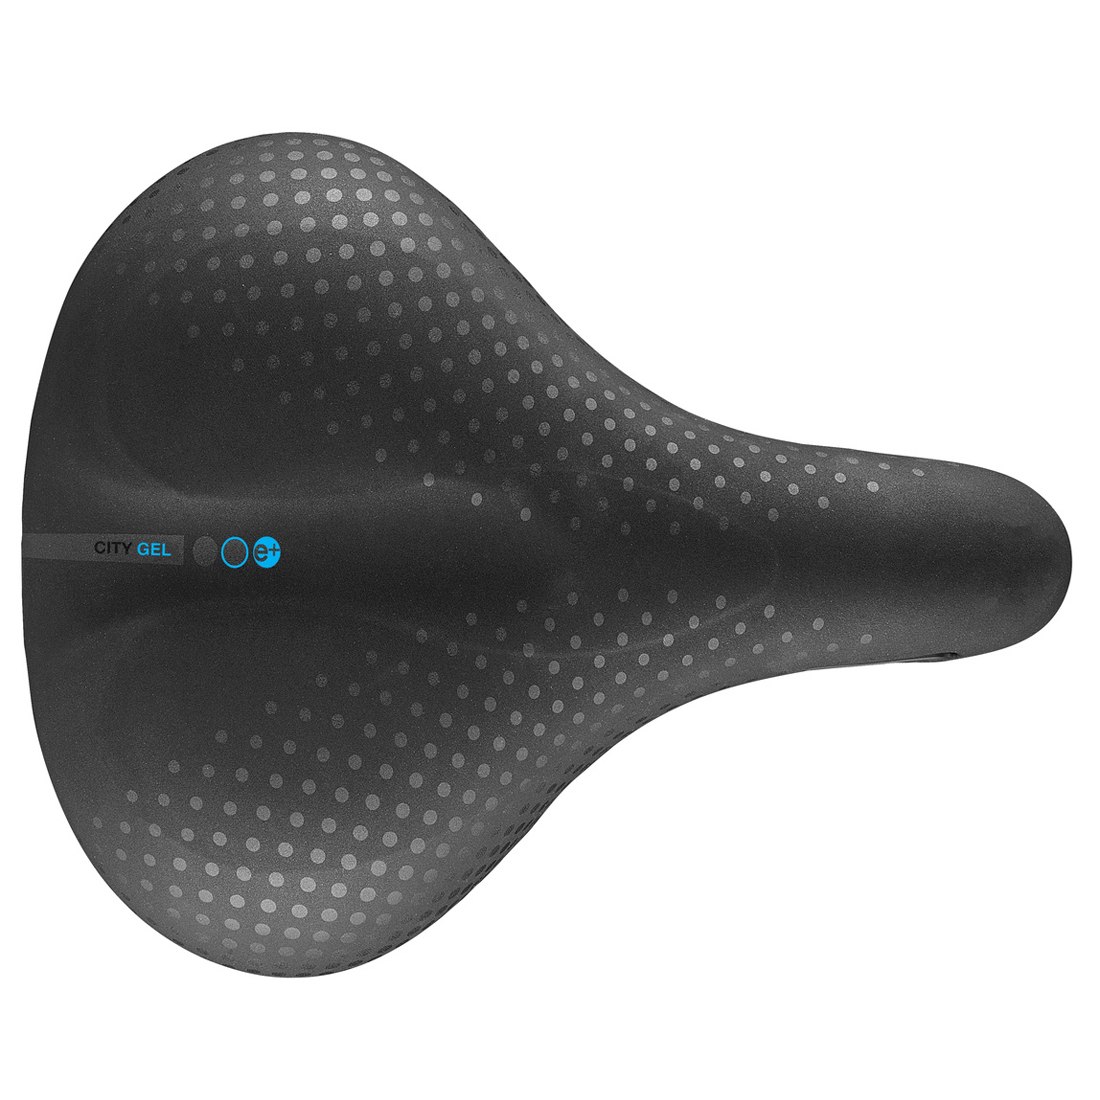 Picture of Selle San Marco City Gel Saddle S - black